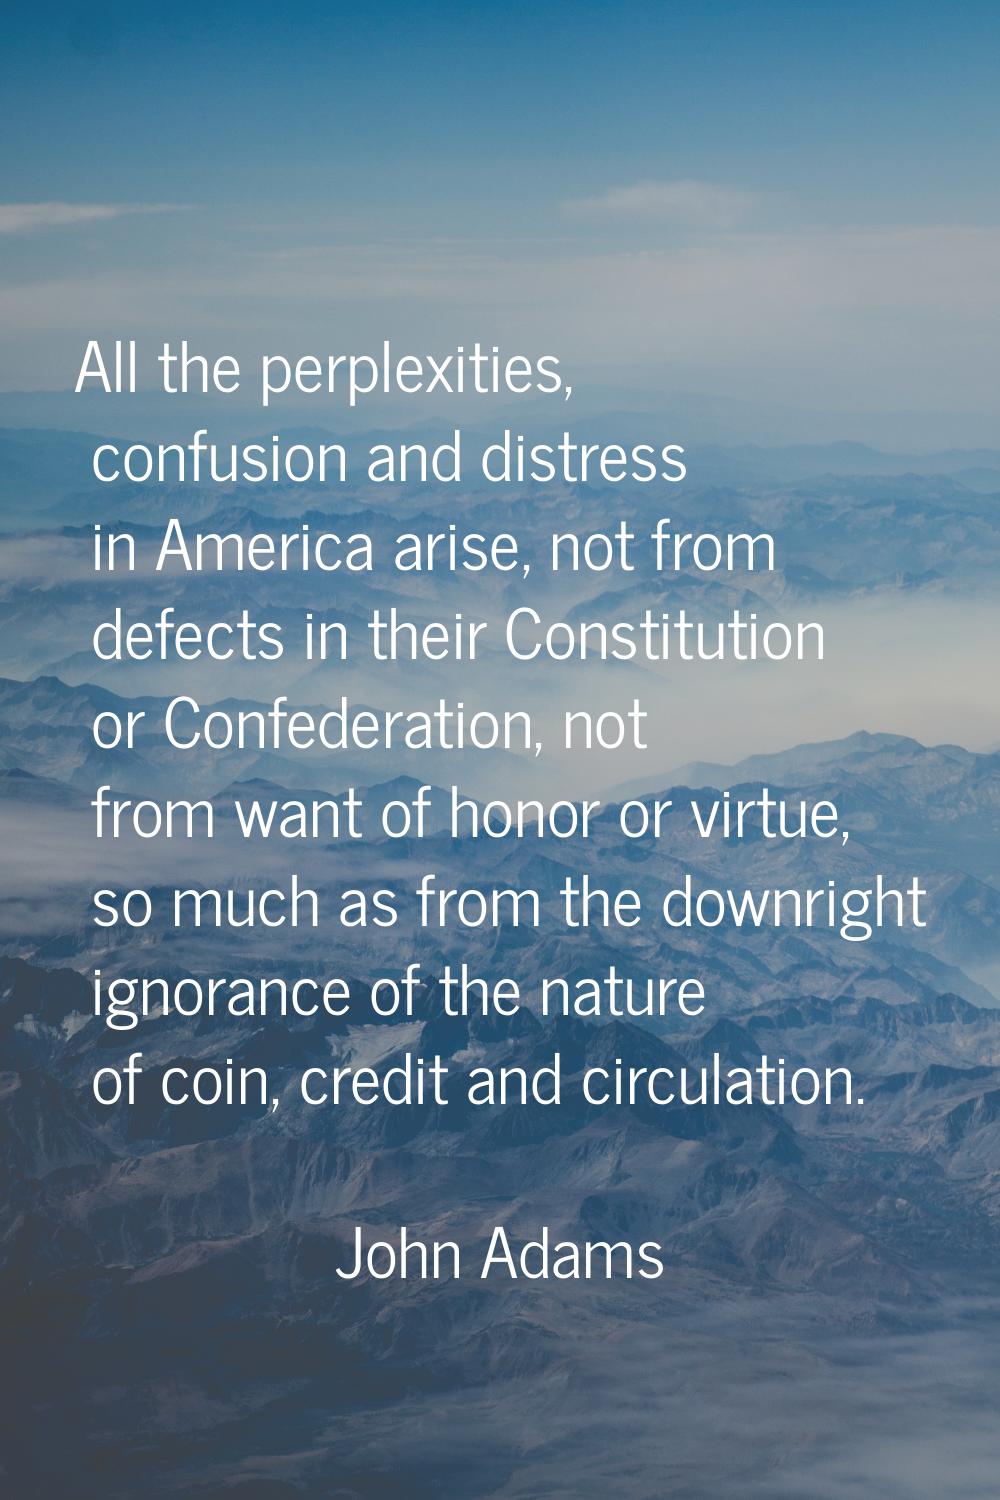 All the perplexities, confusion and distress in America arise, not from defects in their Constituti